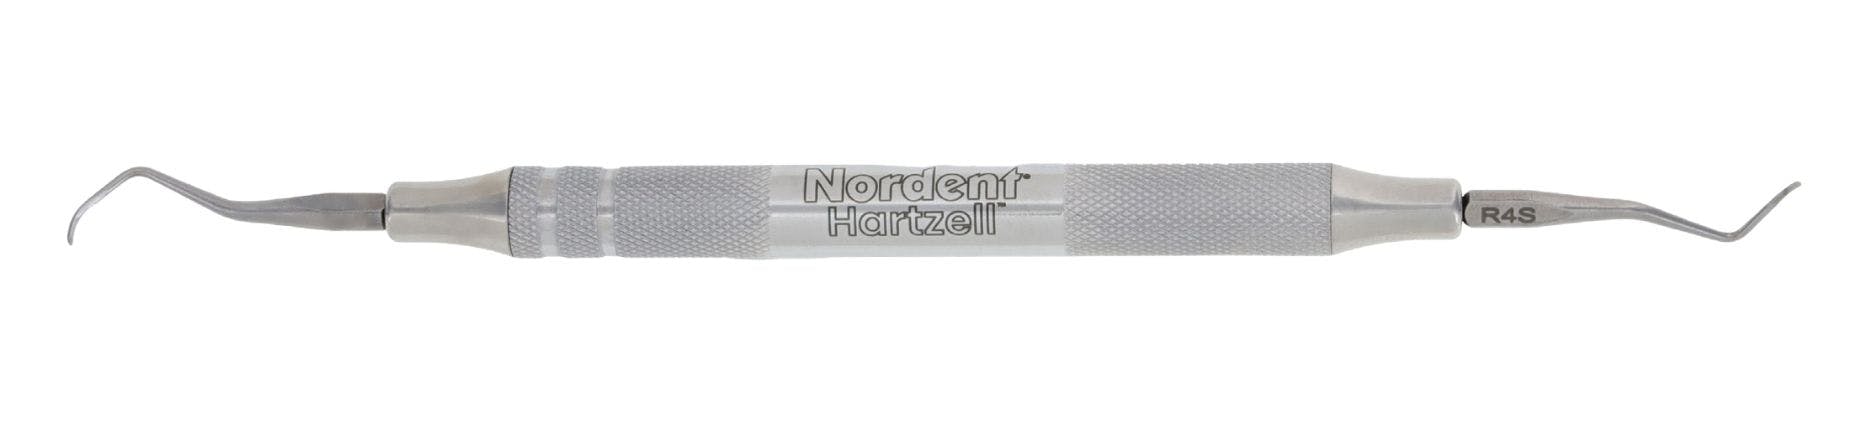 Hartzell Cone Socket Scalers and Curettes | Image Credit: © Nordent Manufacturing, Inc